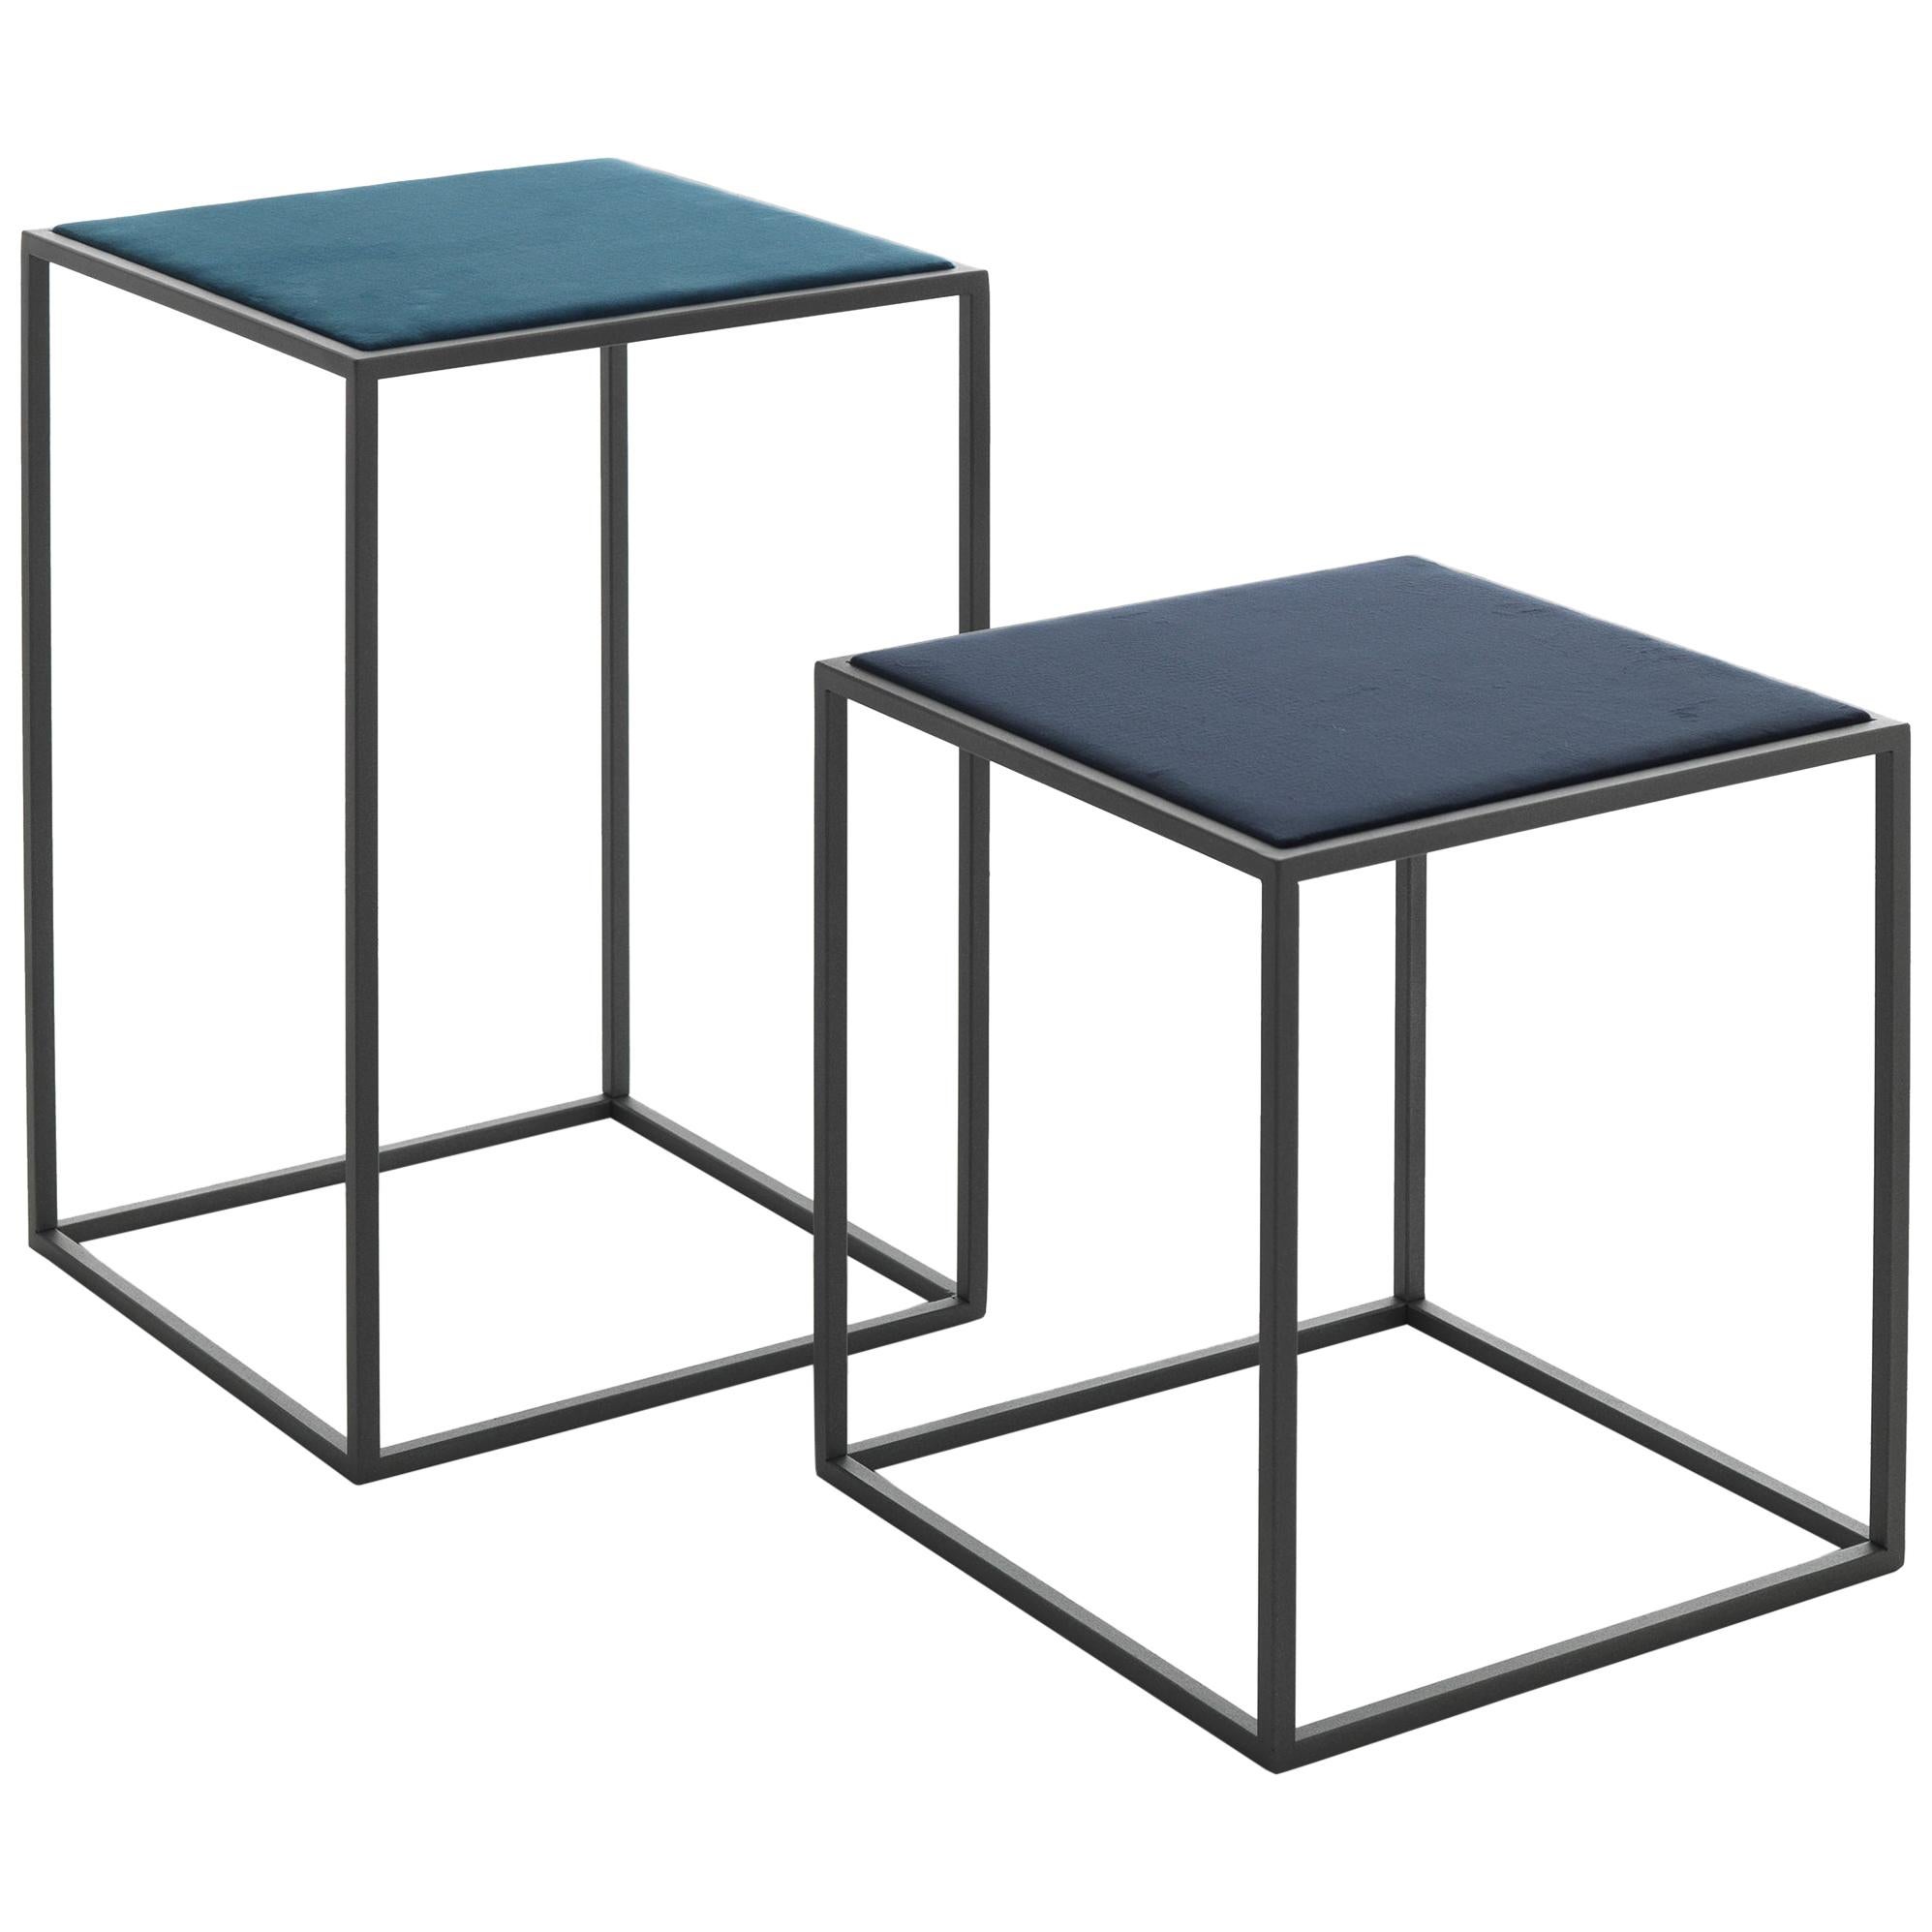 21st Century Modern Painted Steel Side Tables With Tops In Cotton Velvet For Sale